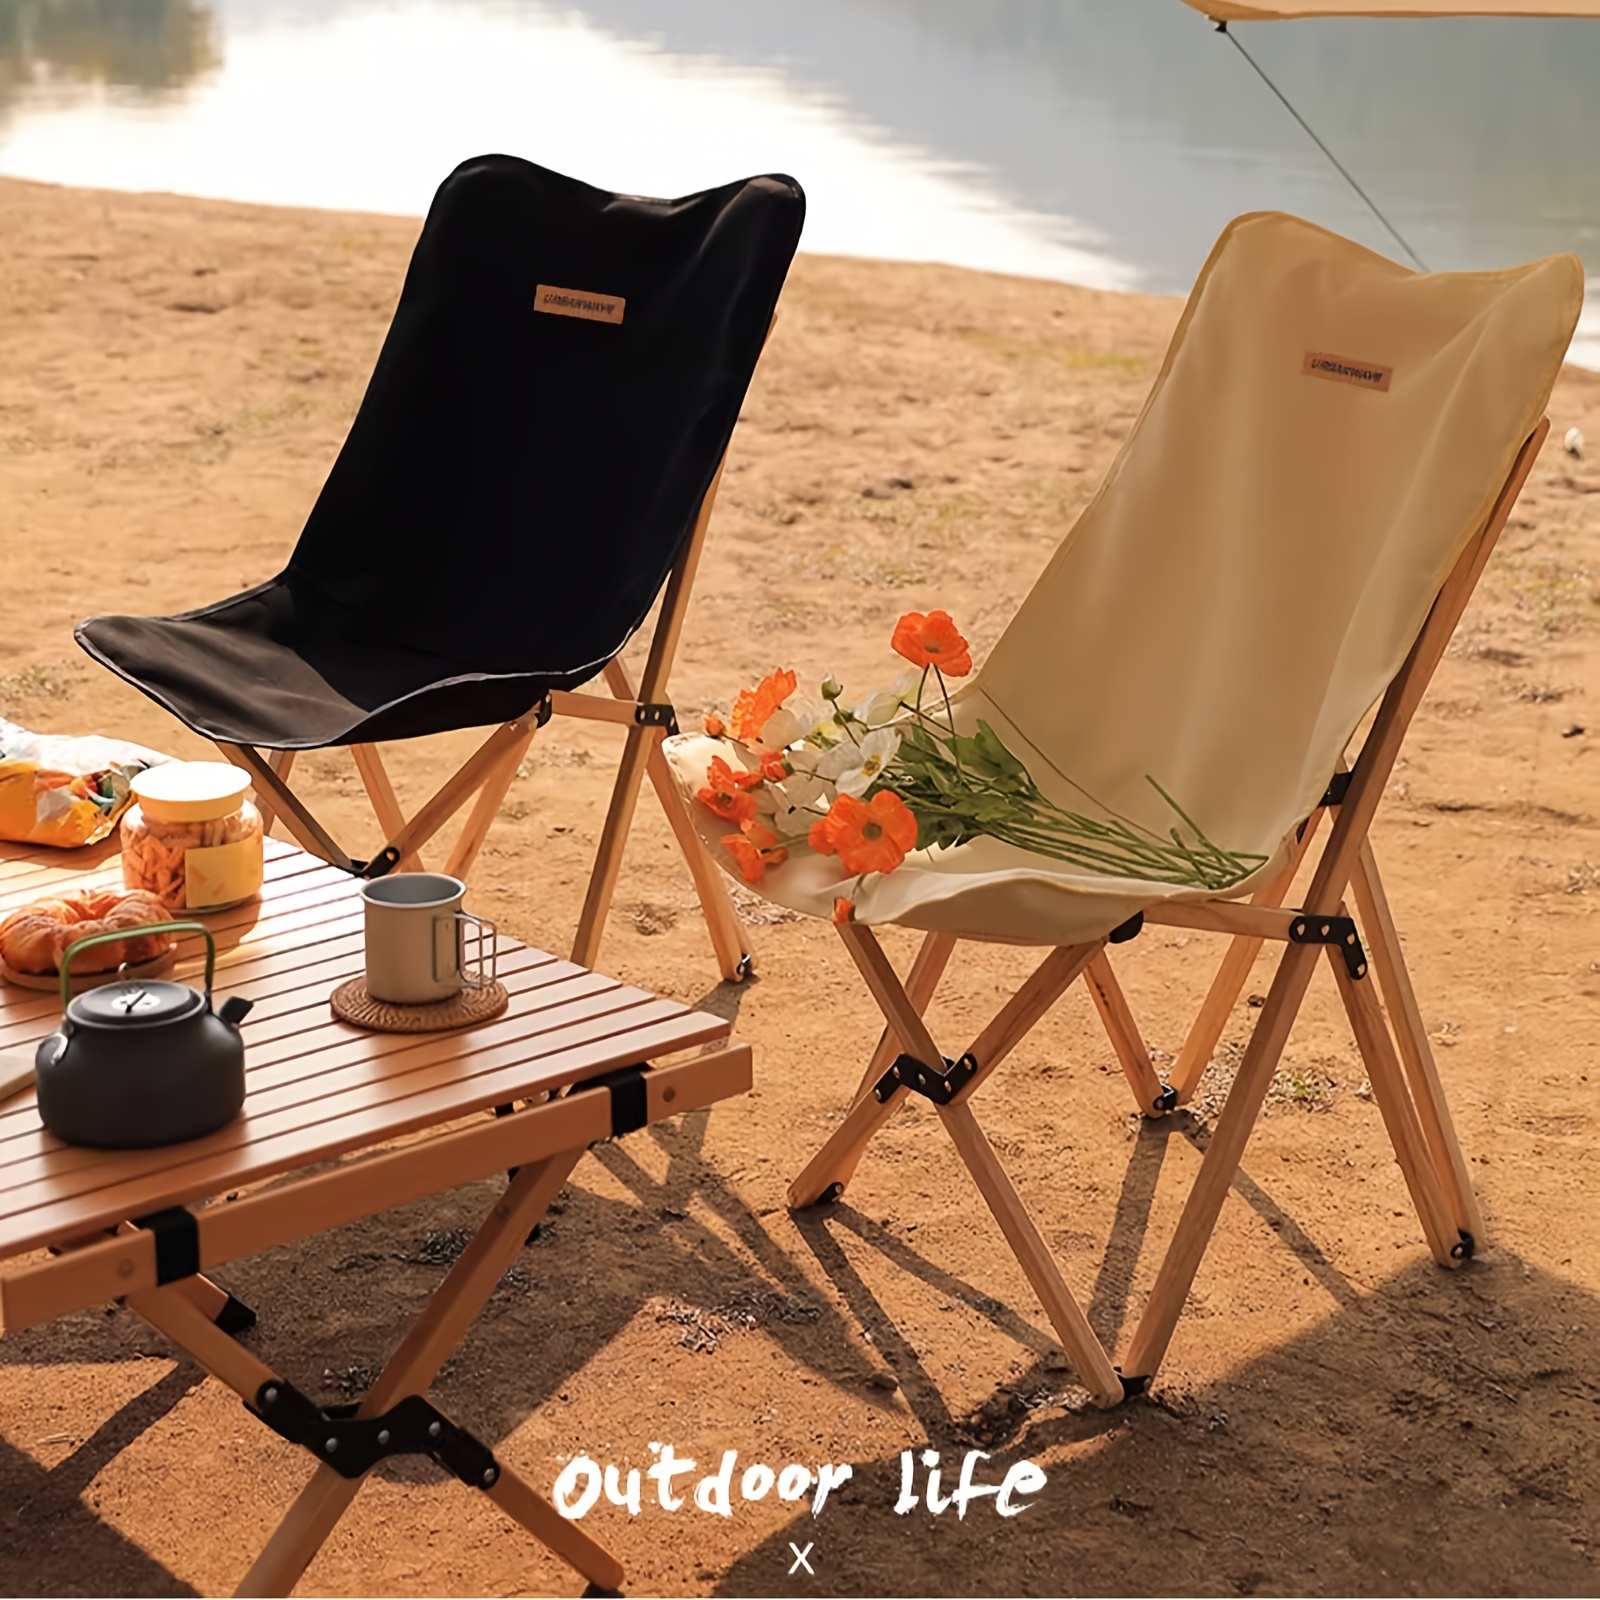 Mini Backrest Folding Chair Camping capacity 120kg Portable Chair